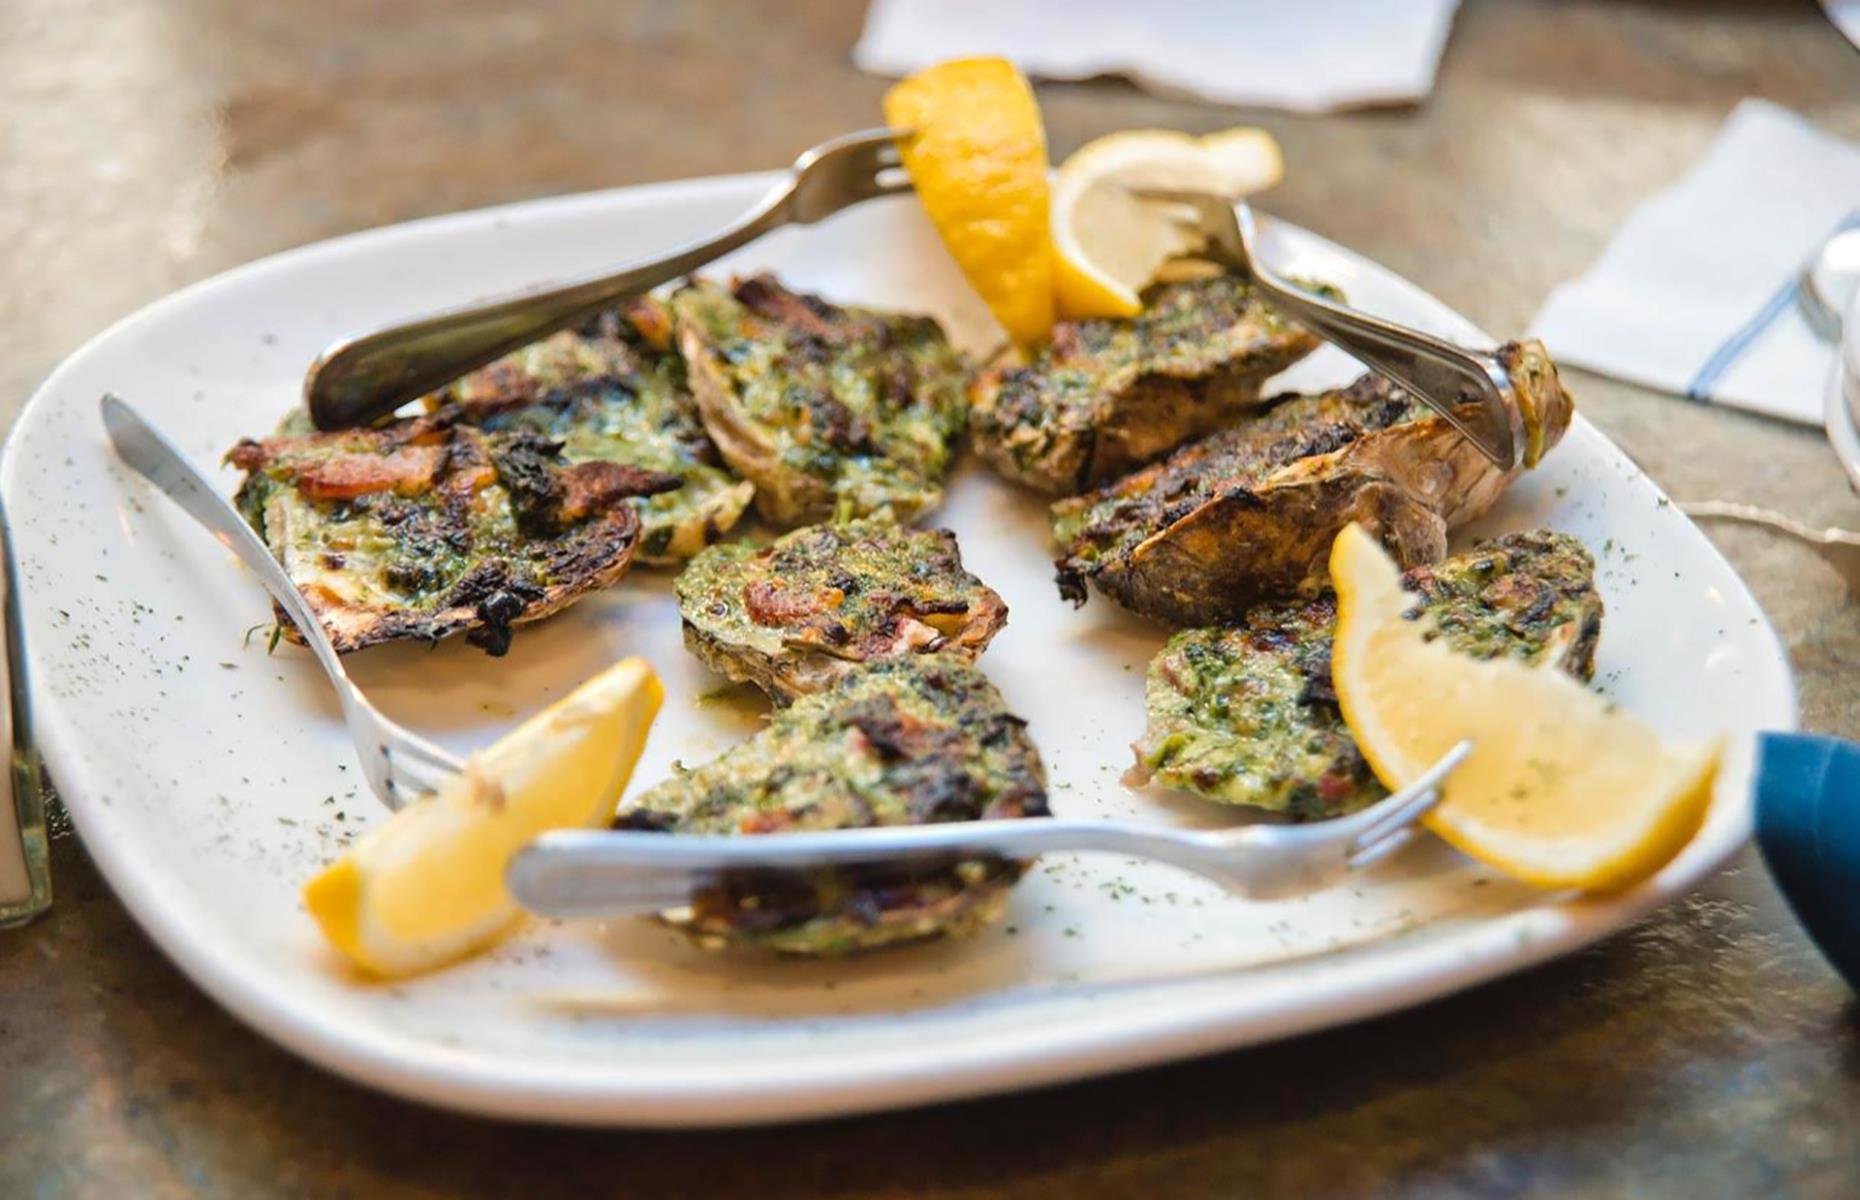 <p>The state of Virginia is well-known for its oysters so there's nowhere better for an <a href="http://www.tastevirginia.com/">oyster and wine pairing tour</a>. The tour begins in Lynnhaven Bay where you'll learn more about the history of this delicacy. Then, head along Virginia's oyster trail, sampling them raw and Rockefeller style (baked or broiled), with carefully selected wine pairings. Family-owned seafood restaurant Rockafeller's is a favorite stop. </p>